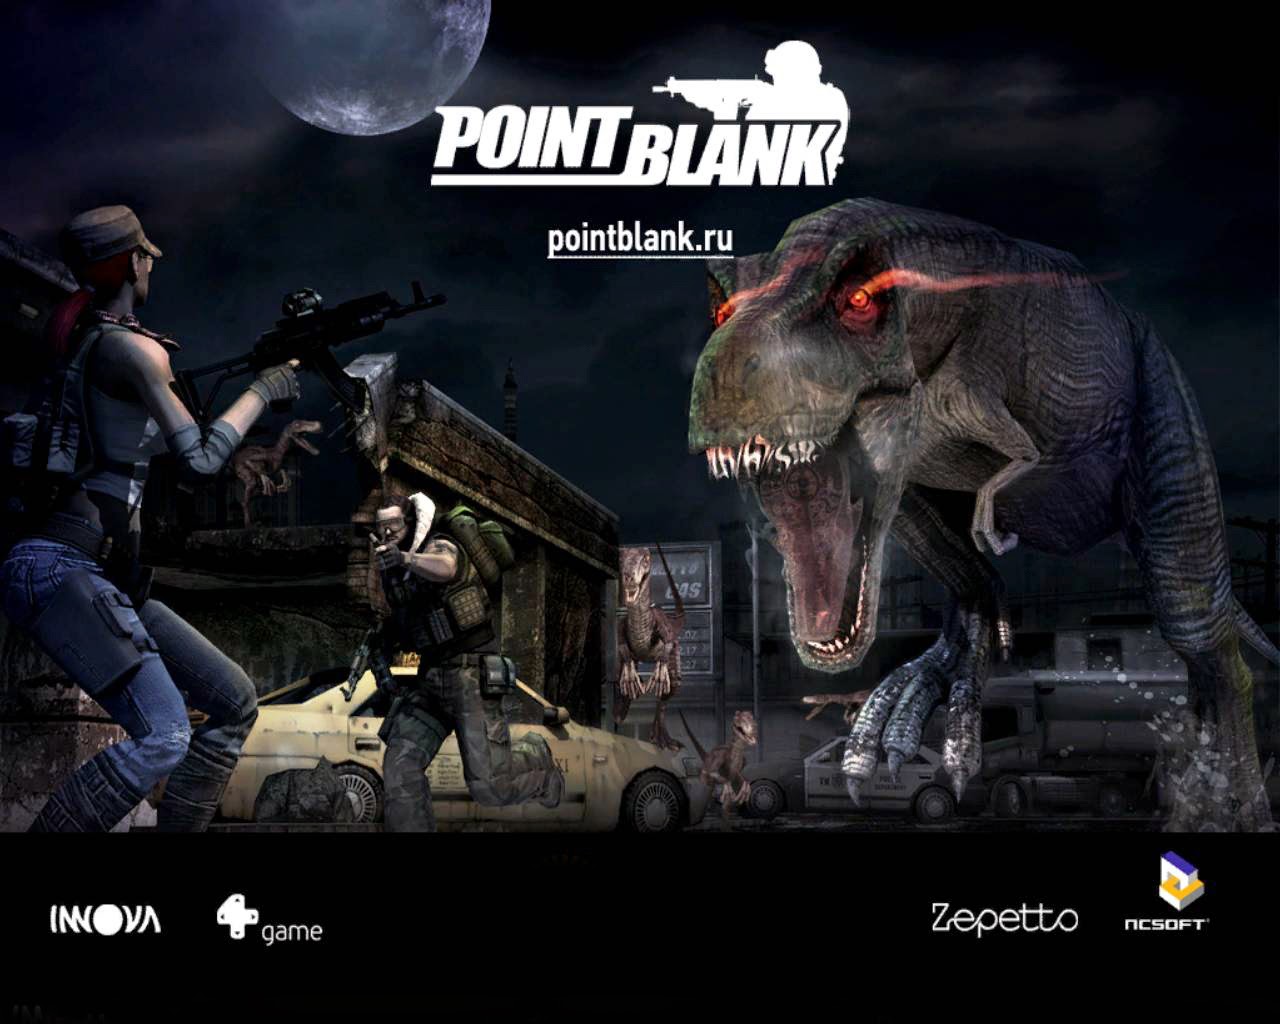 point blank wallpaper hd,action adventure game,pc game,games,dinosaur,adventure game